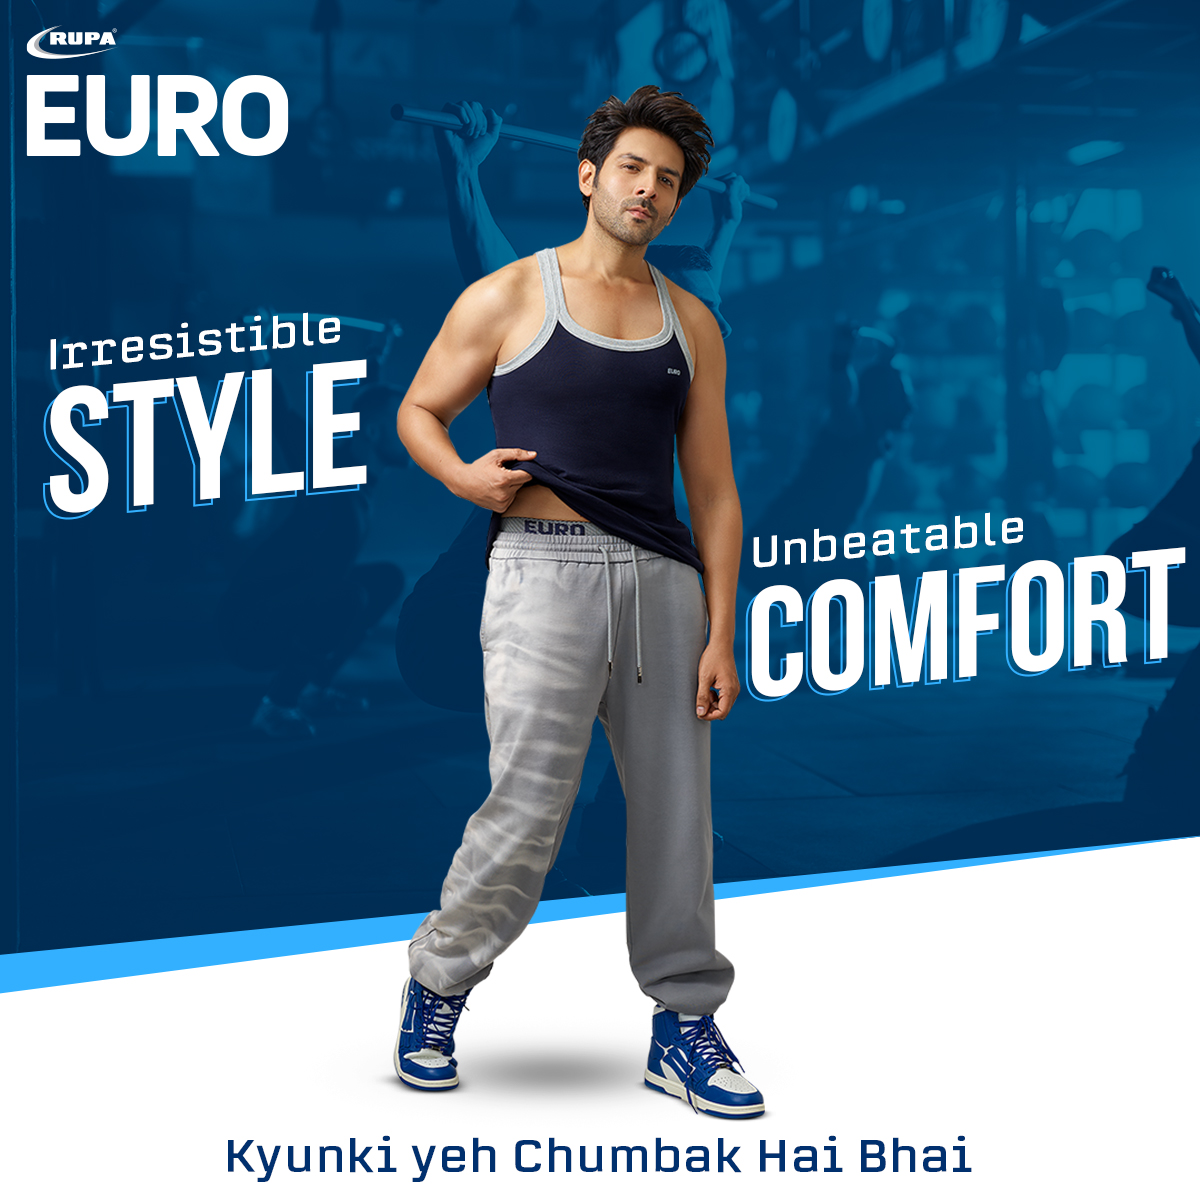 Euro Fashions on X: Step up your style game and groove with Euro's trendy  swag. #SwagInStyle #Euro #EuroFashionlnners #LifeStyle #Fashion  #KartikAaryan #KartikAaryanFans #Trending #Style #Online   / X